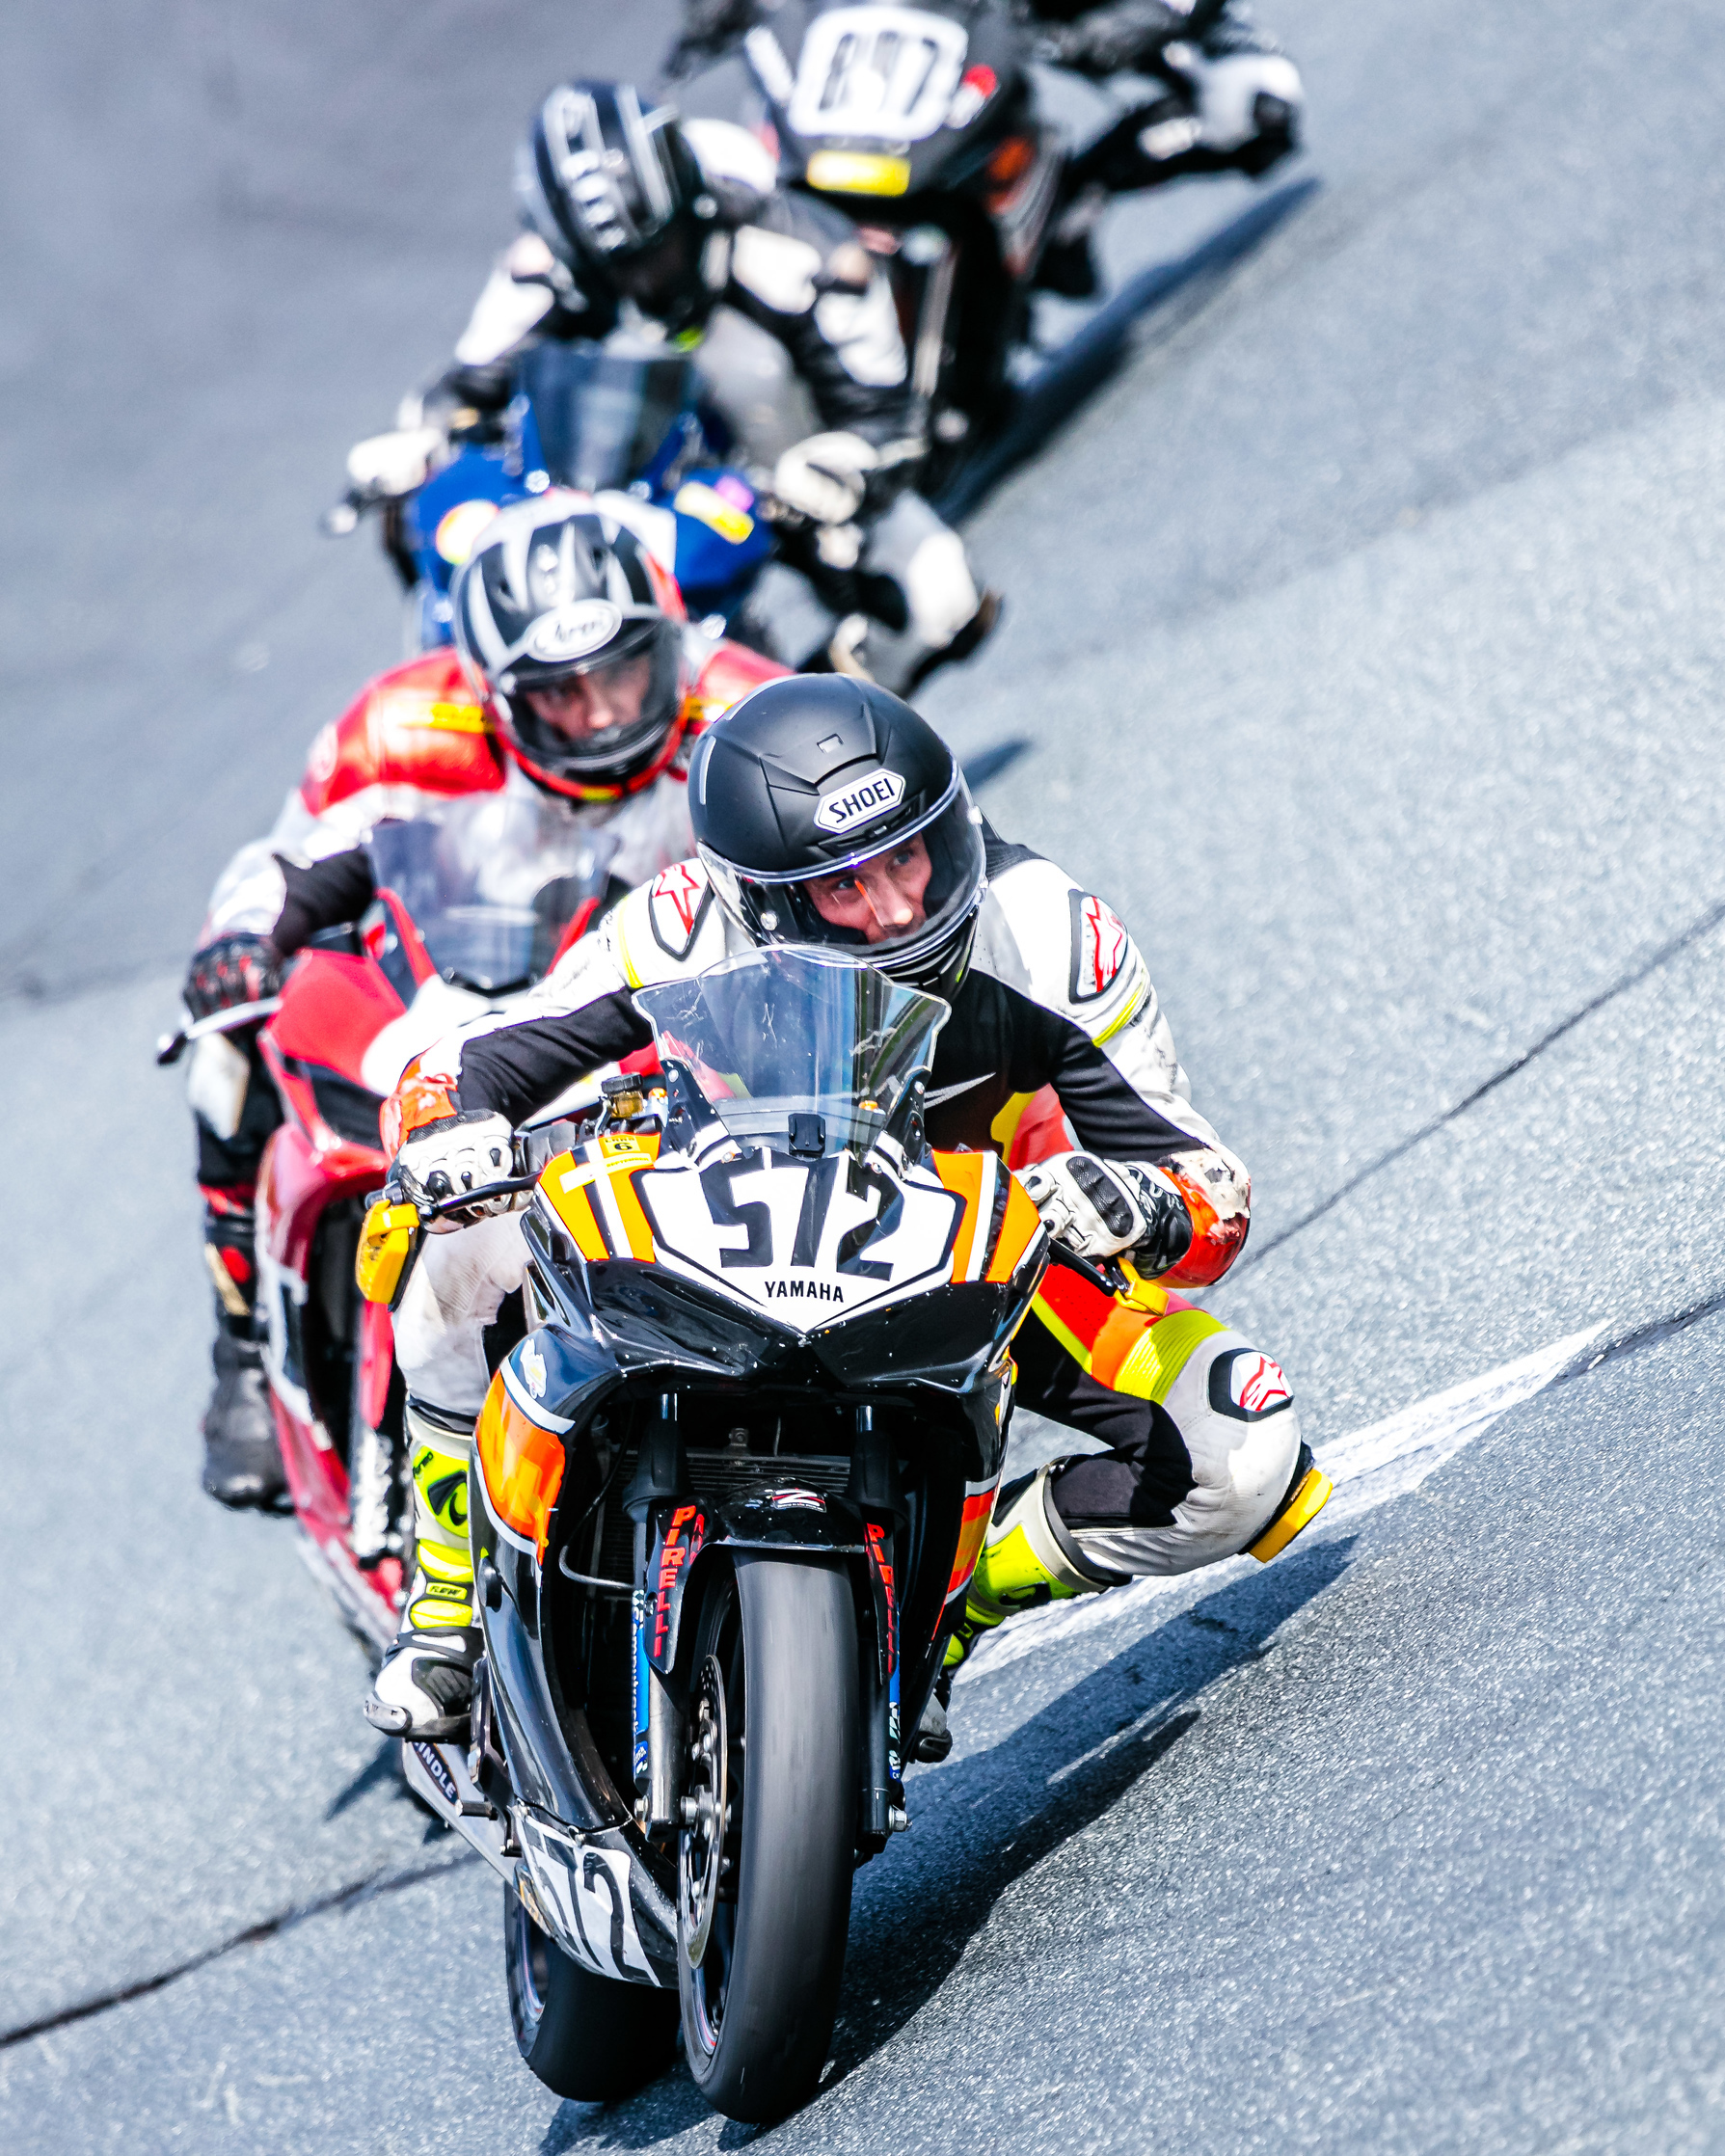 Shawn Barron won the Supersport 300 class of the Loudon Road Racing Series.